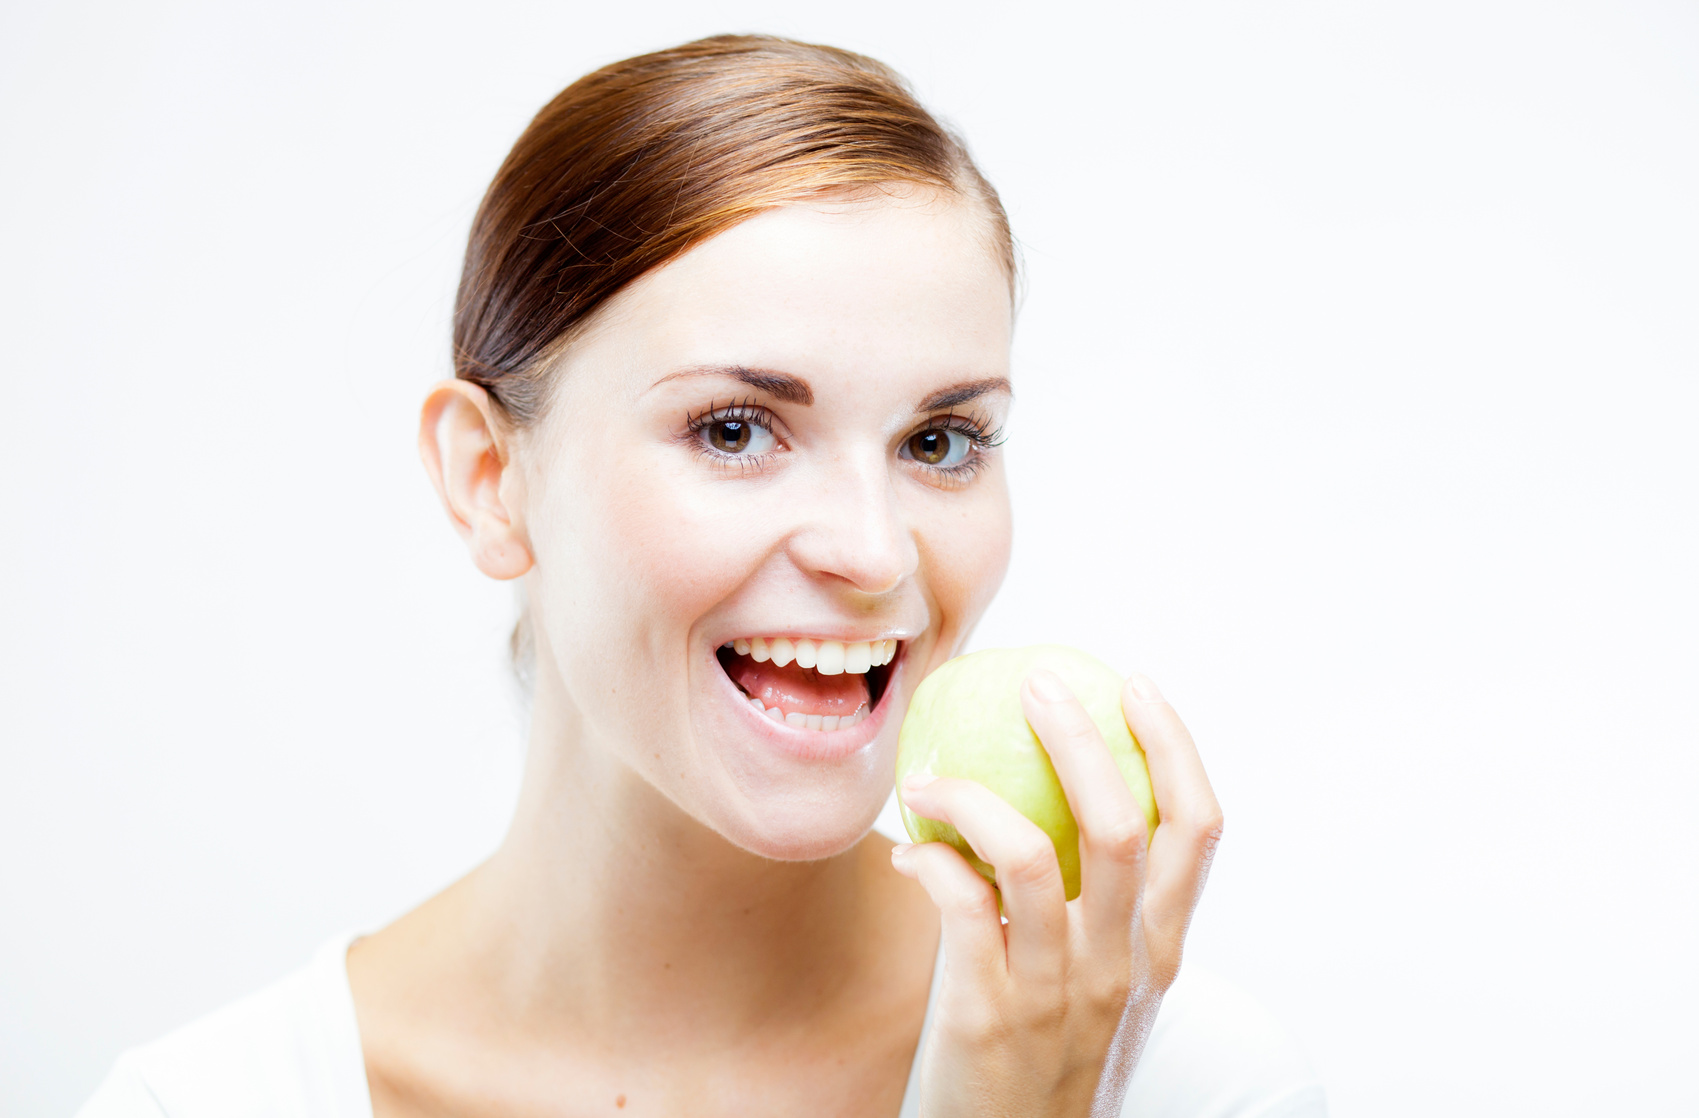 Smiling woman holding and eating green apple